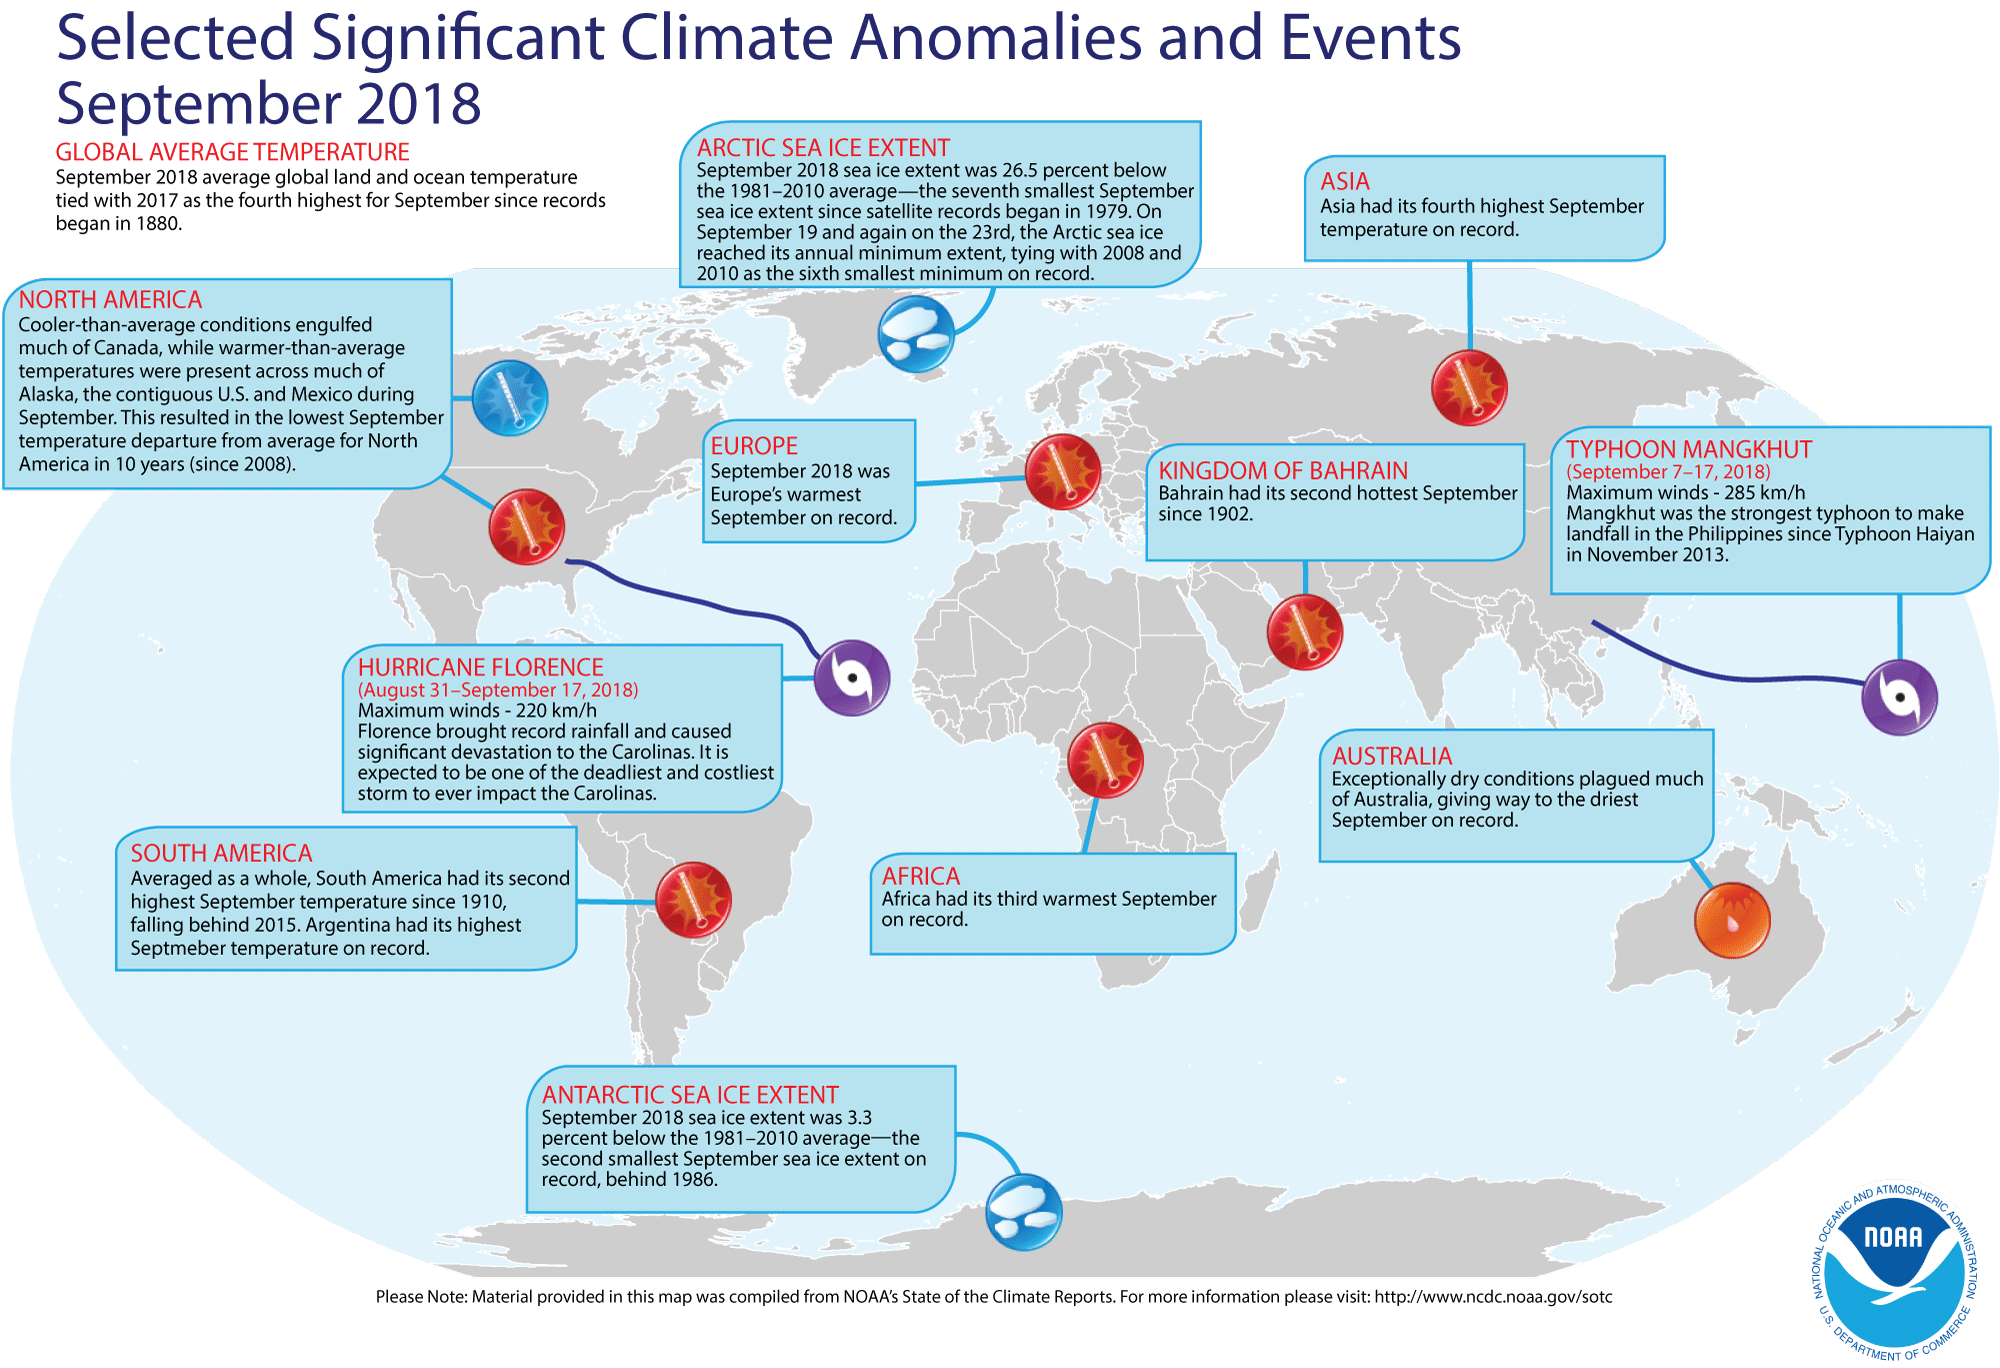 An annotated map of the world showing notable climate events that occurred in September 2018. For details, see the bulleted list below in our story and on the Web at http://www.ncdc.noaa.gov/sotc/global/2018/09.